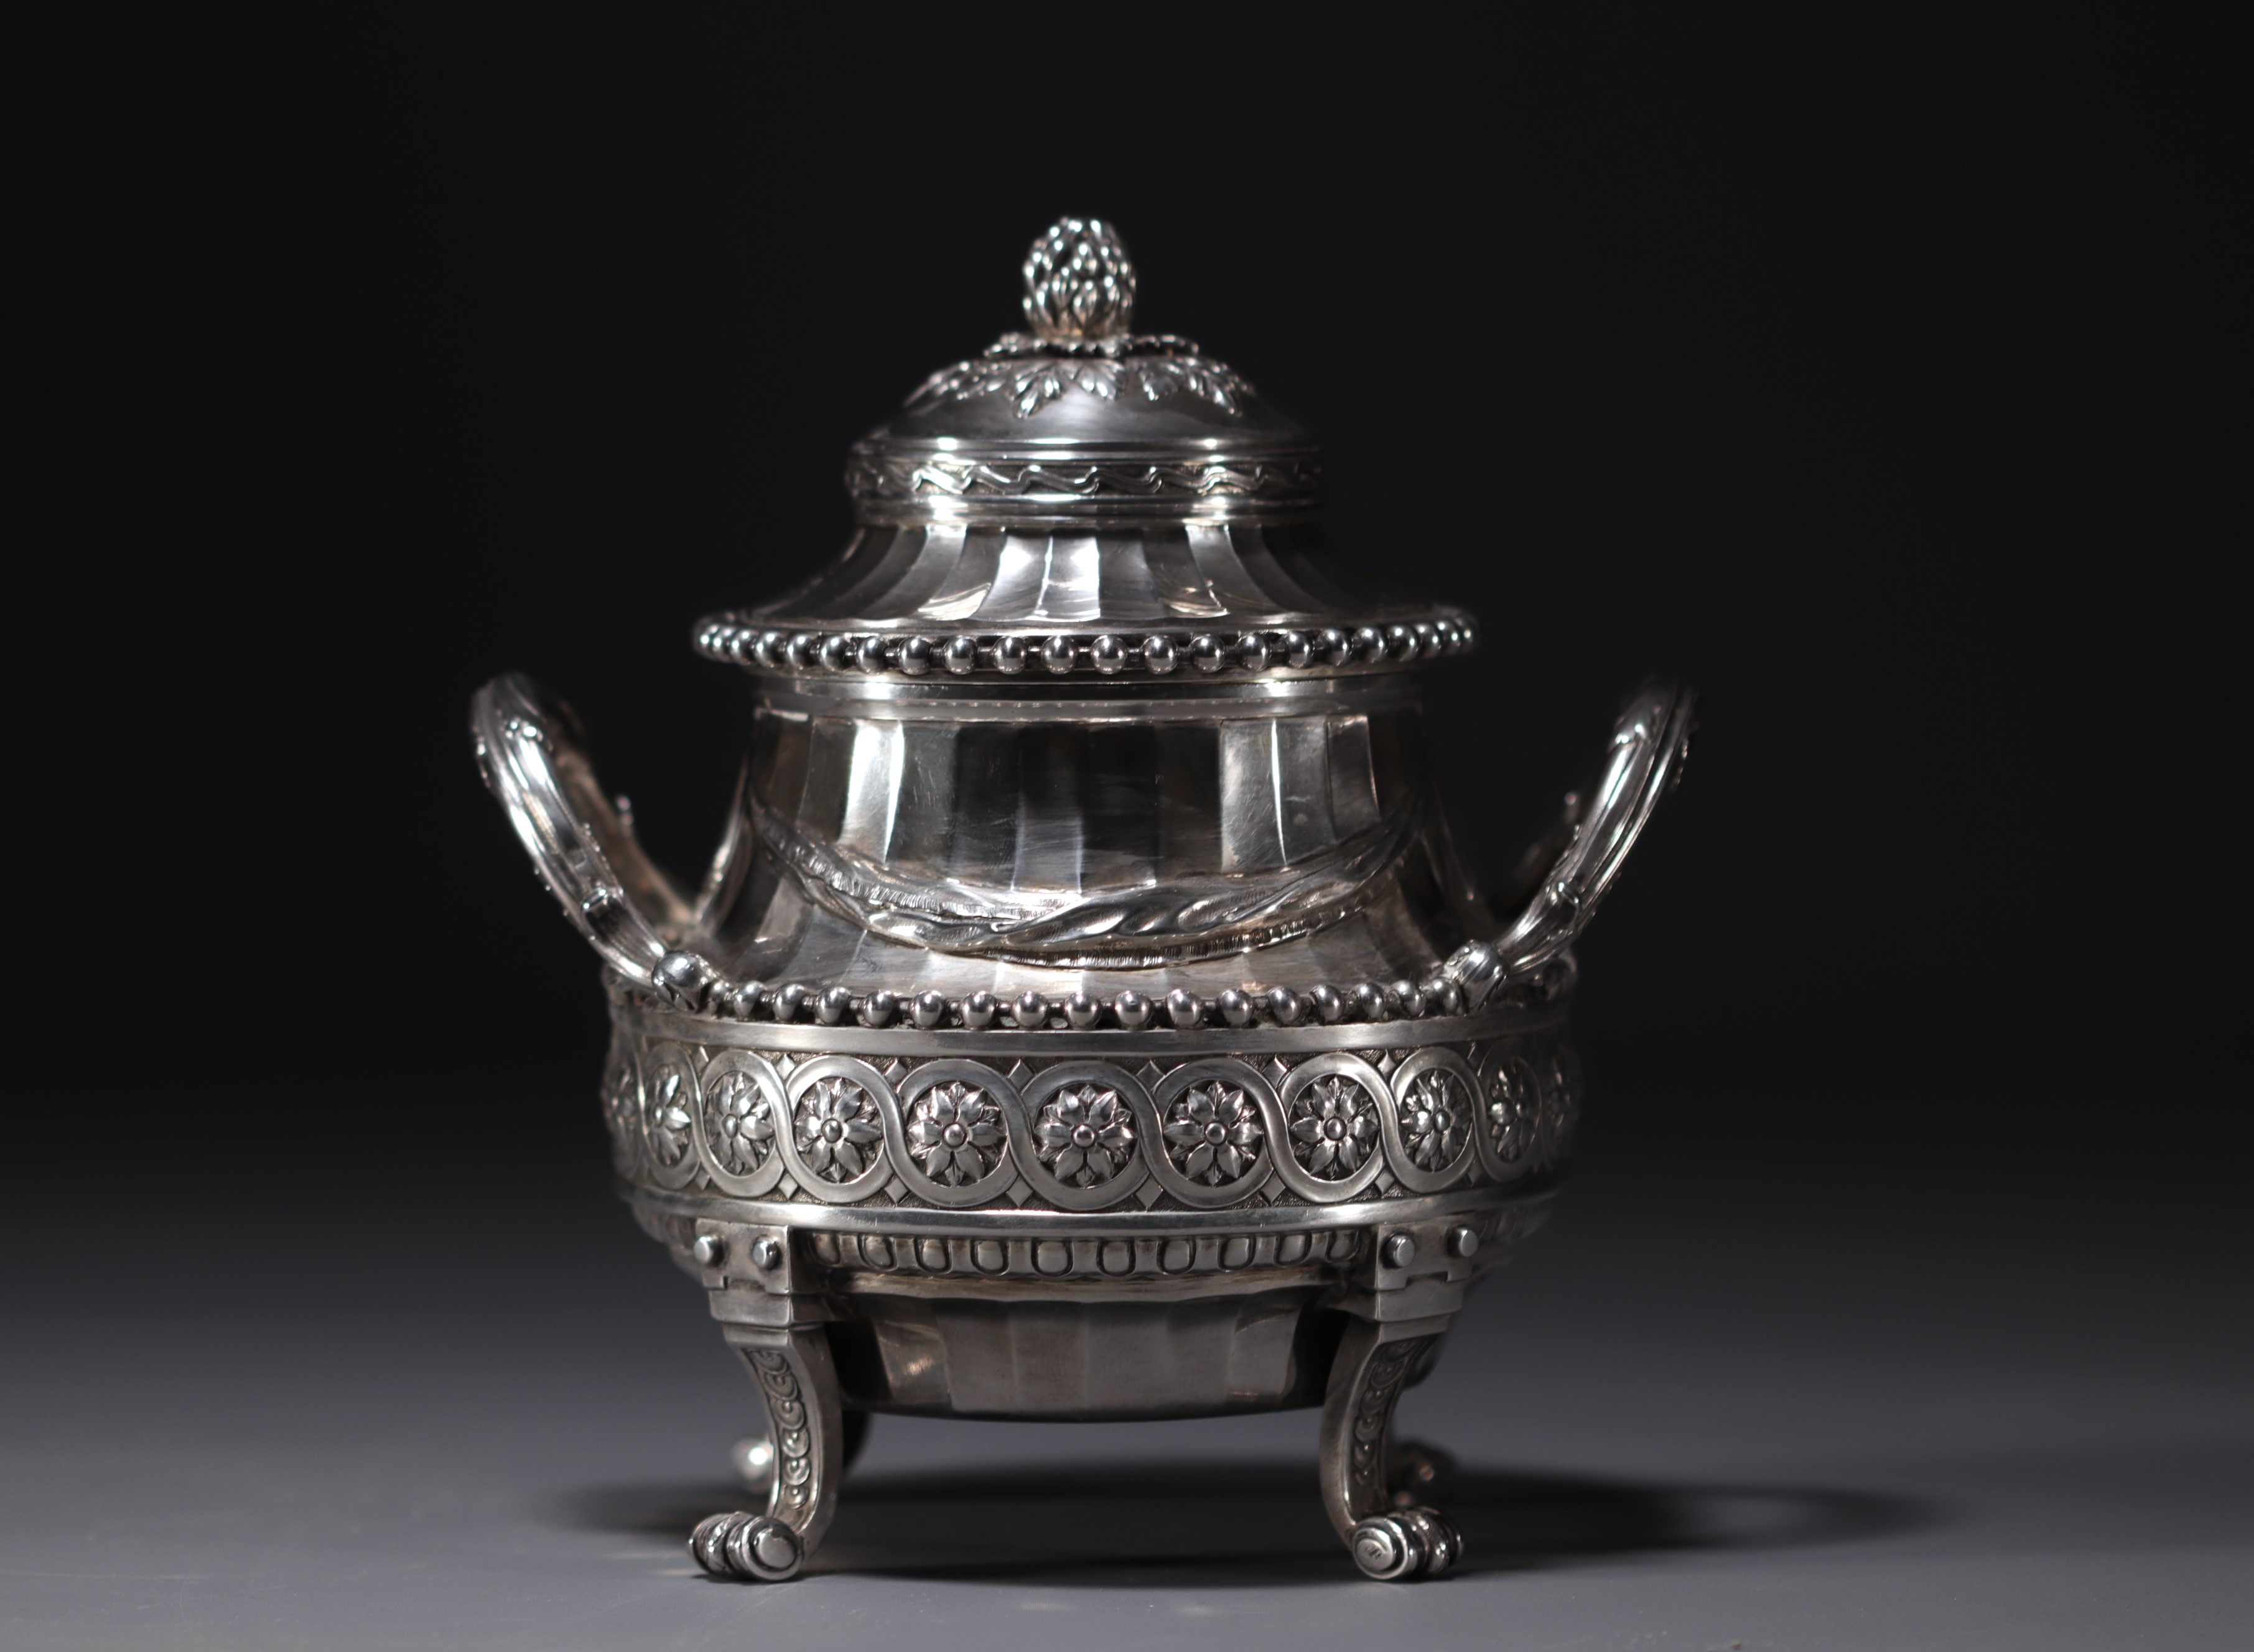 Antoine CARDEILHAC - Exceptional Regency-style solid silver service, 19th century. - Image 12 of 15